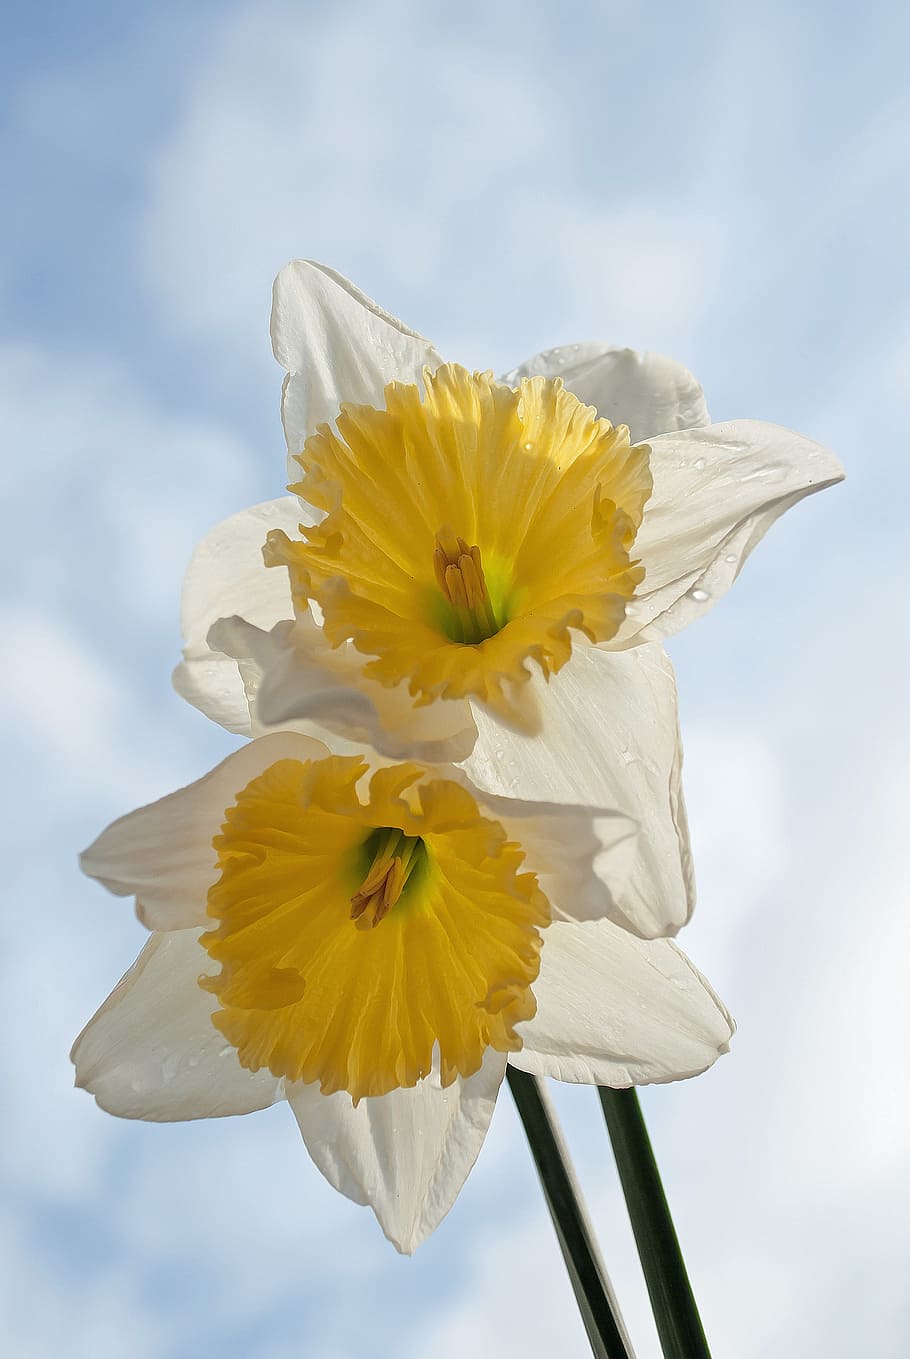 Narcis, Spring, Yellow, White, Nature, spring flower, flower, flowers, sky, plant